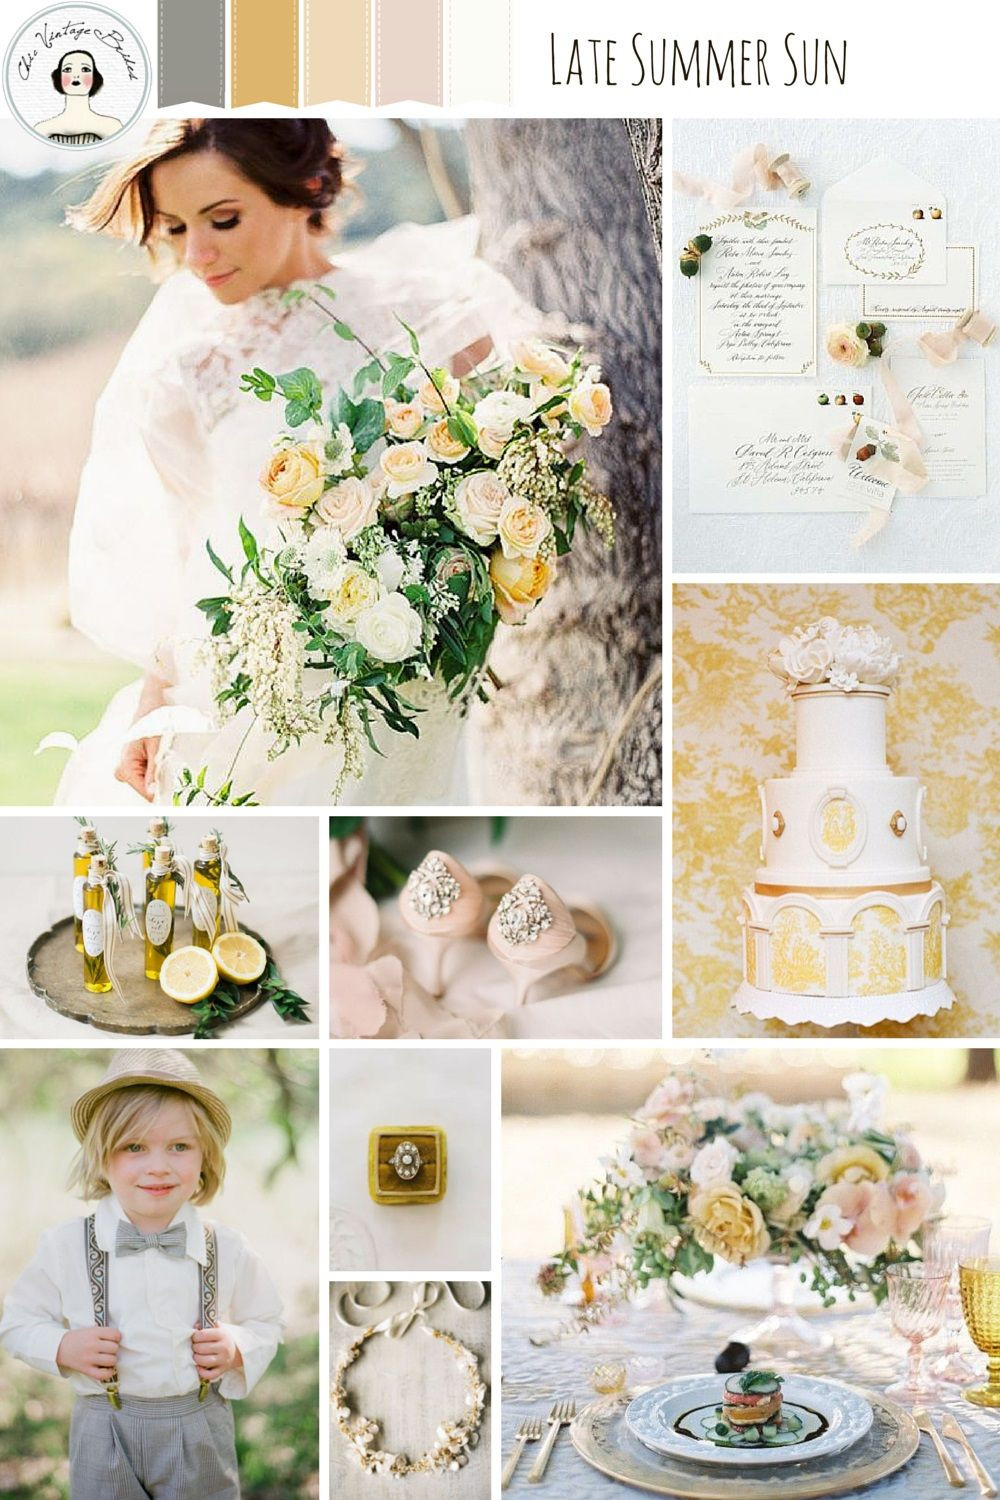 Wedding Themes For August
 A Romantic Late Summer Wedding Inspiration Board